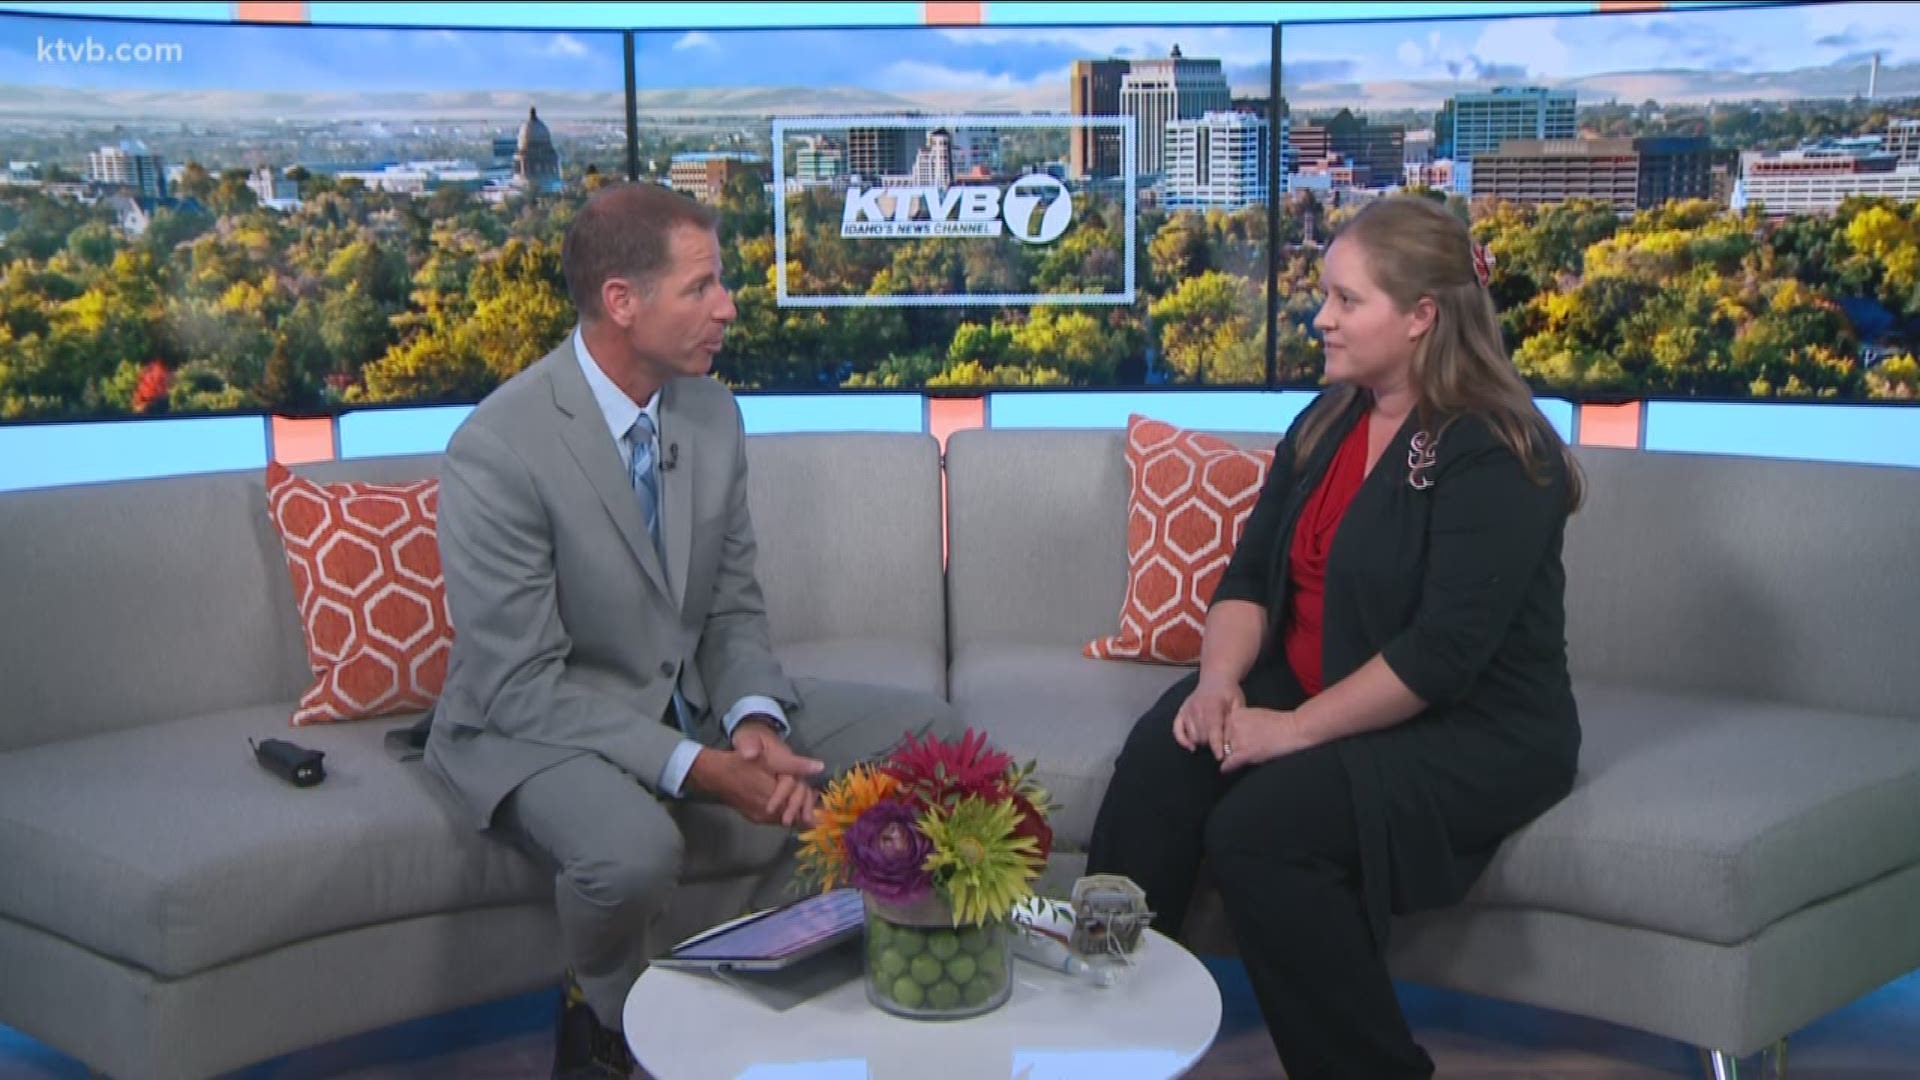 Dr. Brooke Fukuoka, the owner and dentist of Your Special Smiles and representative of the Idaho State Dental Association visited KTVB on Tuesday to talk about dental care for people who have special needs.